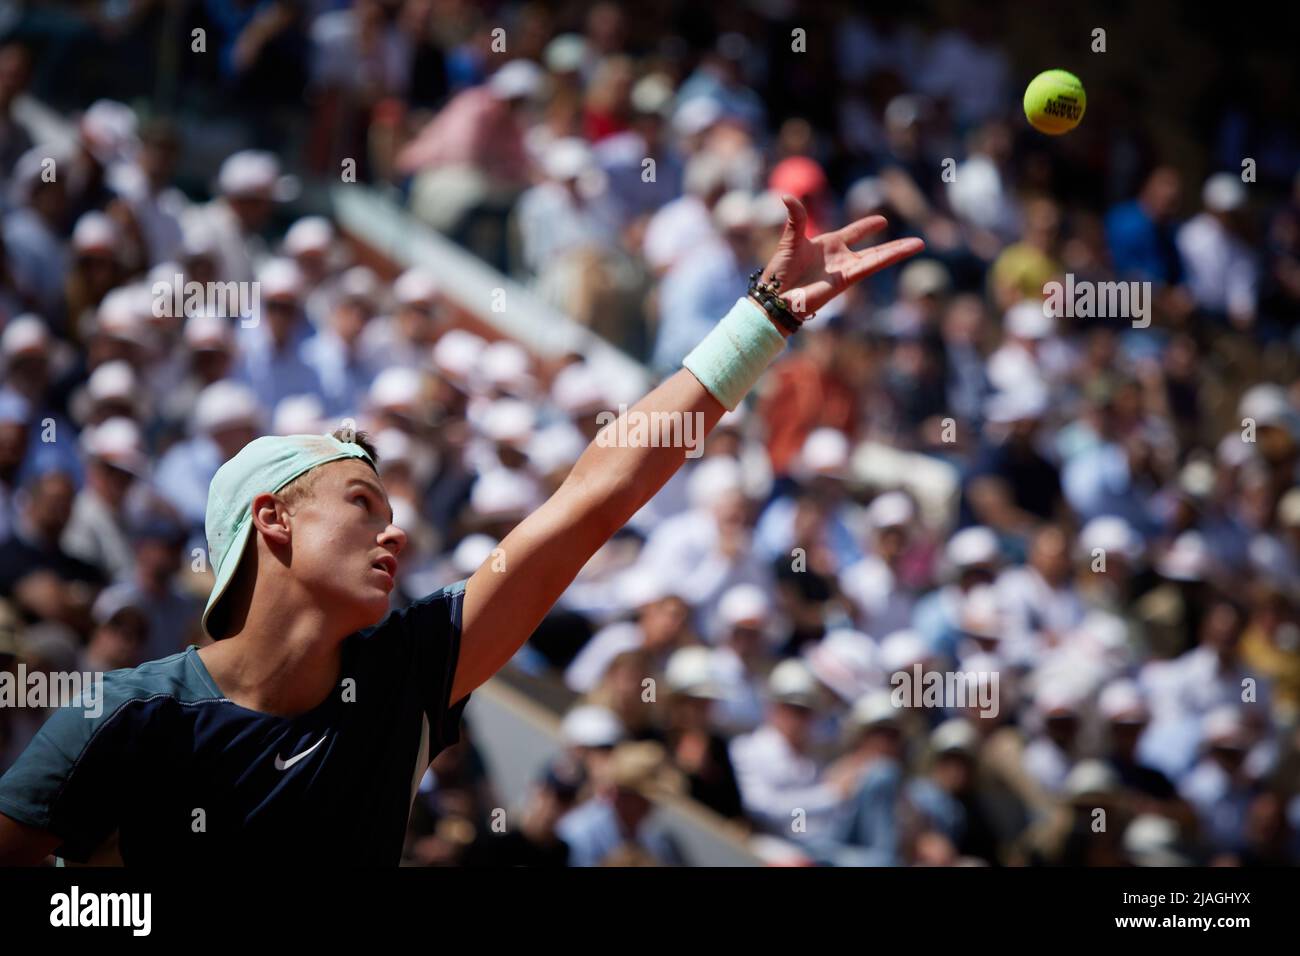 Paris, France. 30th May, 2022. Holger Rune of Denmark serves during the men's singles fourth round match against Stefanos Tsitsipas of Greece at the French Open tennis tournament at Roland Garros in Paris, France, May 30, 2022. Credit: Meng Dingbo/Xinhua/Alamy Live News Stock Photo